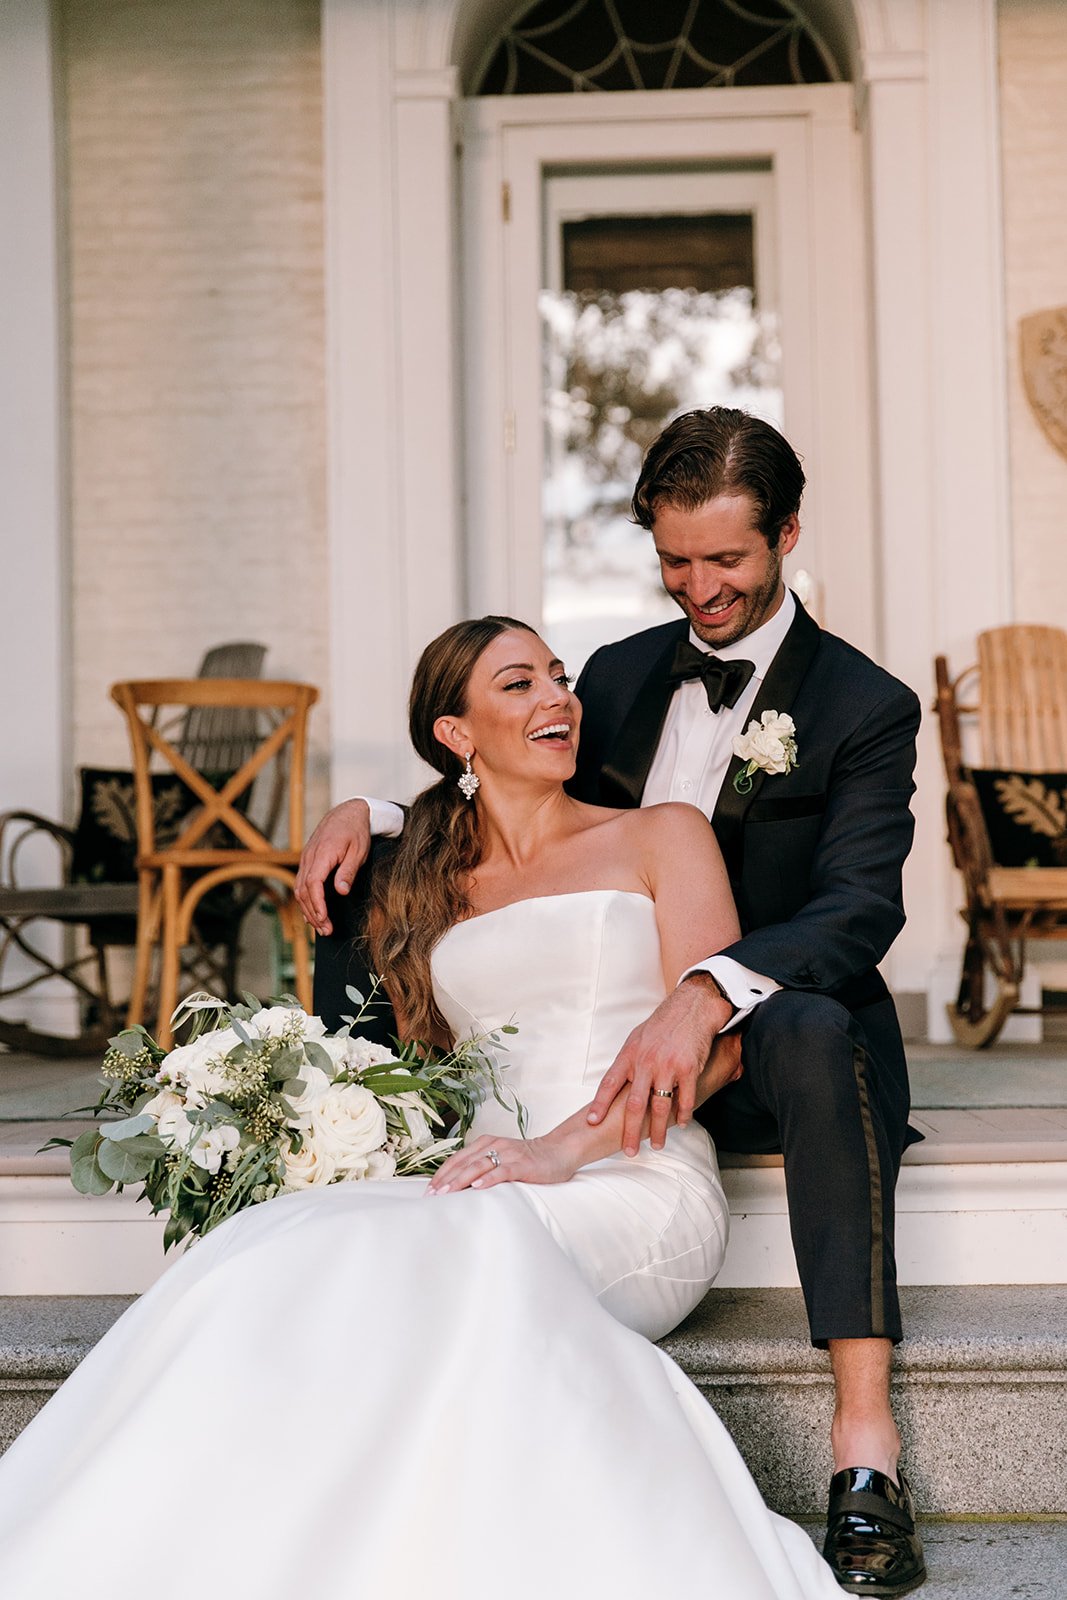 bride and groom giggling together on front steps with bridal bouquet in hand